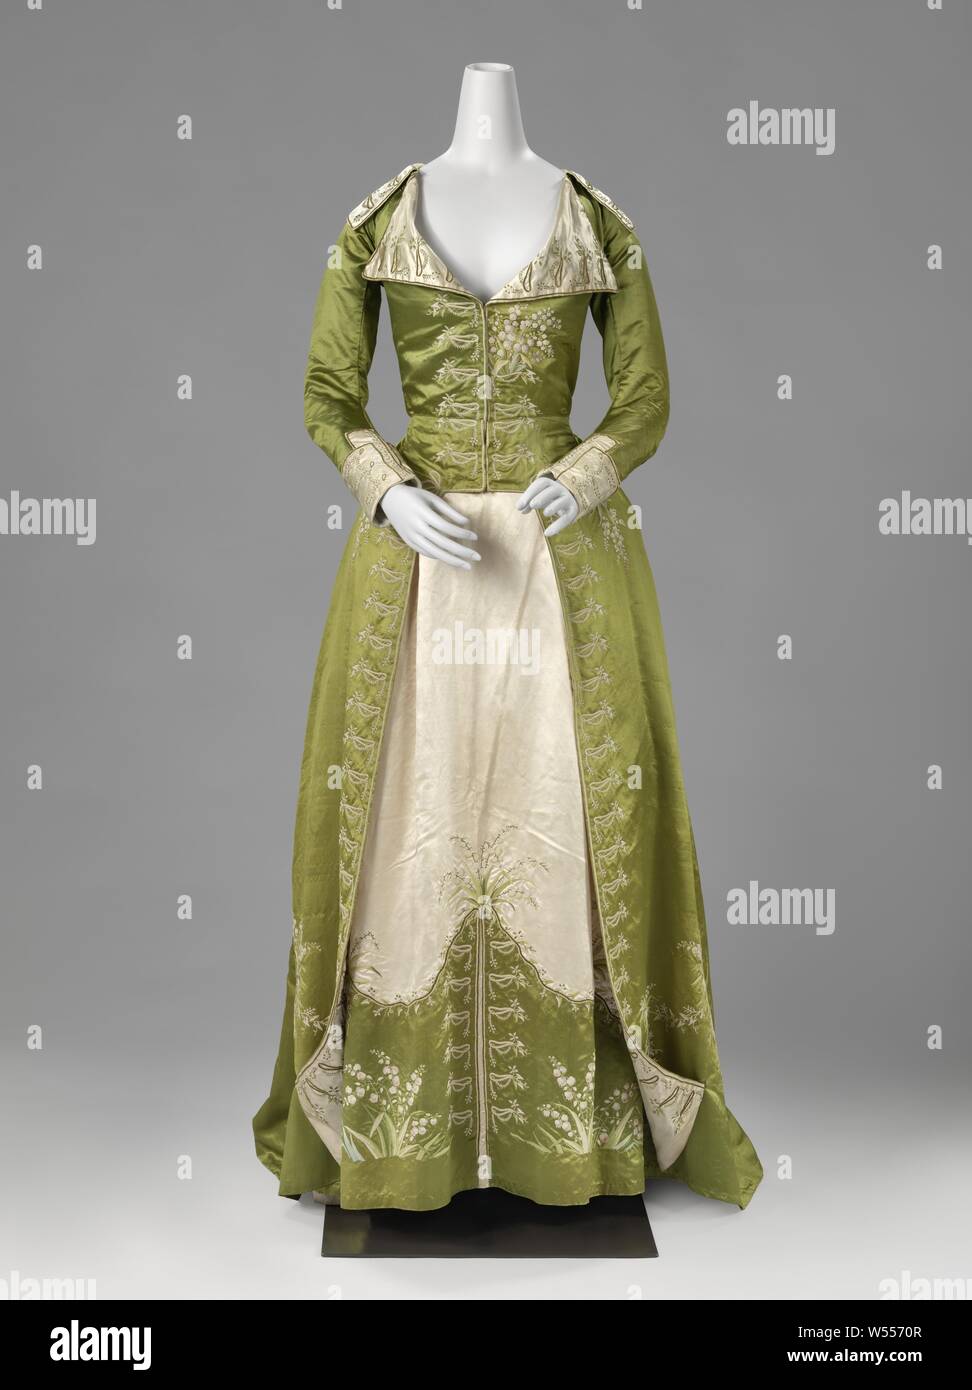 Redingote or Great-Coat Dress Redingote or frock, frock or 'redingote' made of moss green and soft pink silk, consisting of a frock with open skirt (a) and a skirt (b) embroidered with lily of the valley. This dress was worn on October 18, 1881 by Louise Six (1862-1934) for a tableau vivant on the occasion of the silver wedding of her uncle and aunt Six-Teding van Berkhout. The dress was probably from the family of Louise's mother, d'Ablaing van Giessenburg., anonymous, Netherlands, c. 1786 - c. 1789, silk, satin, embroidering Stock Photo